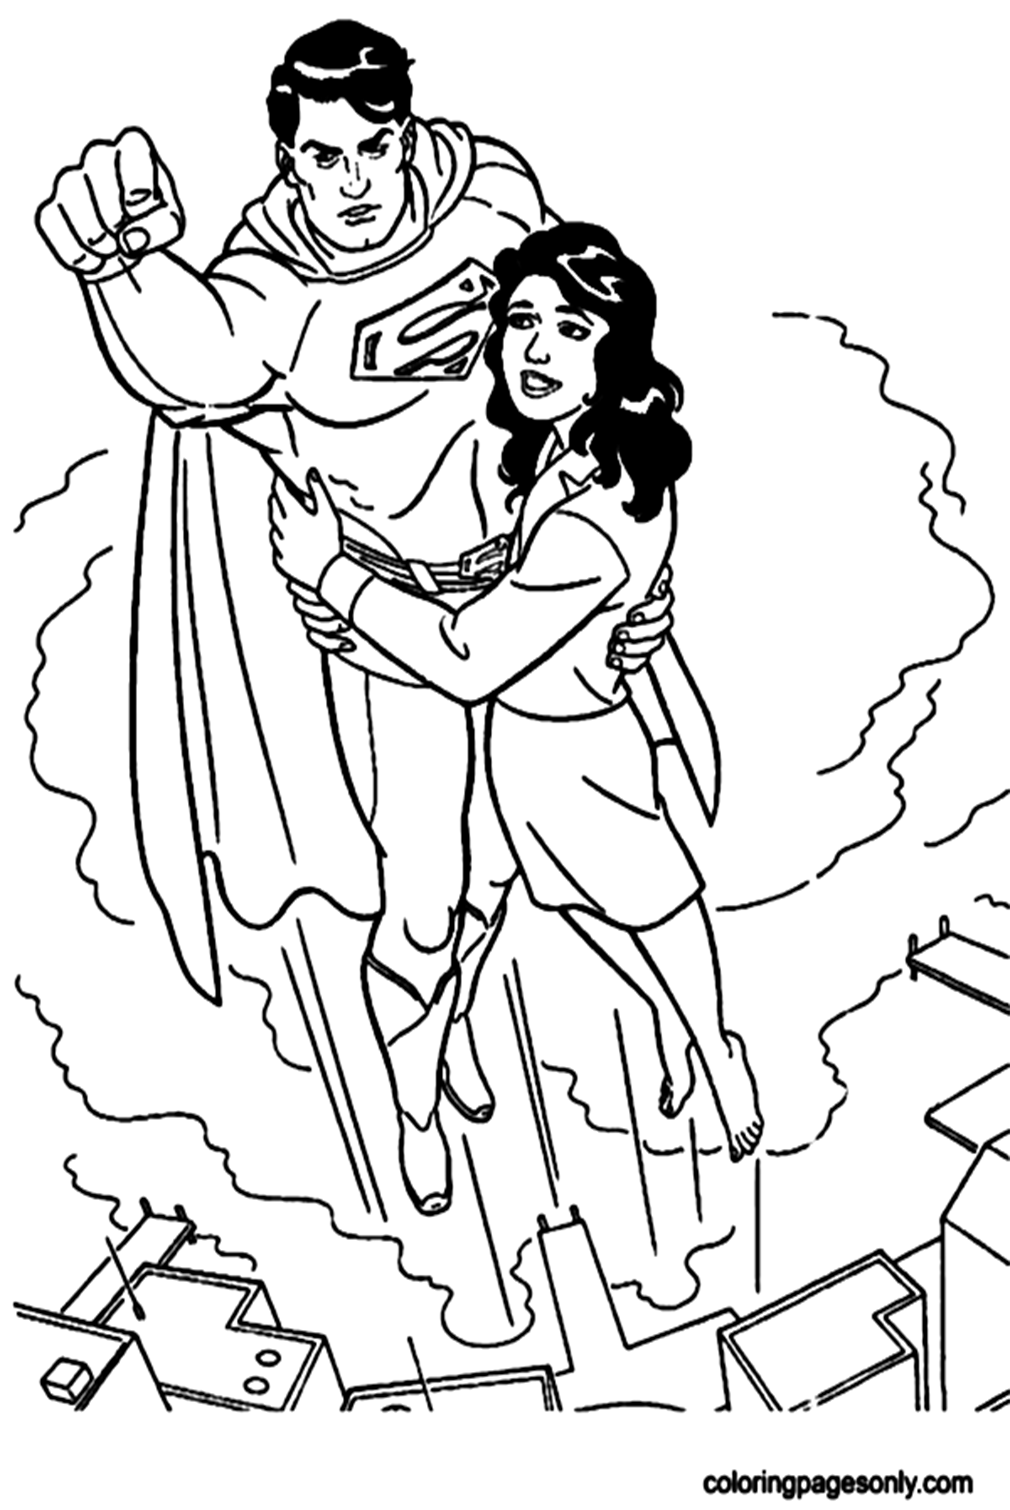 Superman Flying with Lois Lane Coloring Pages